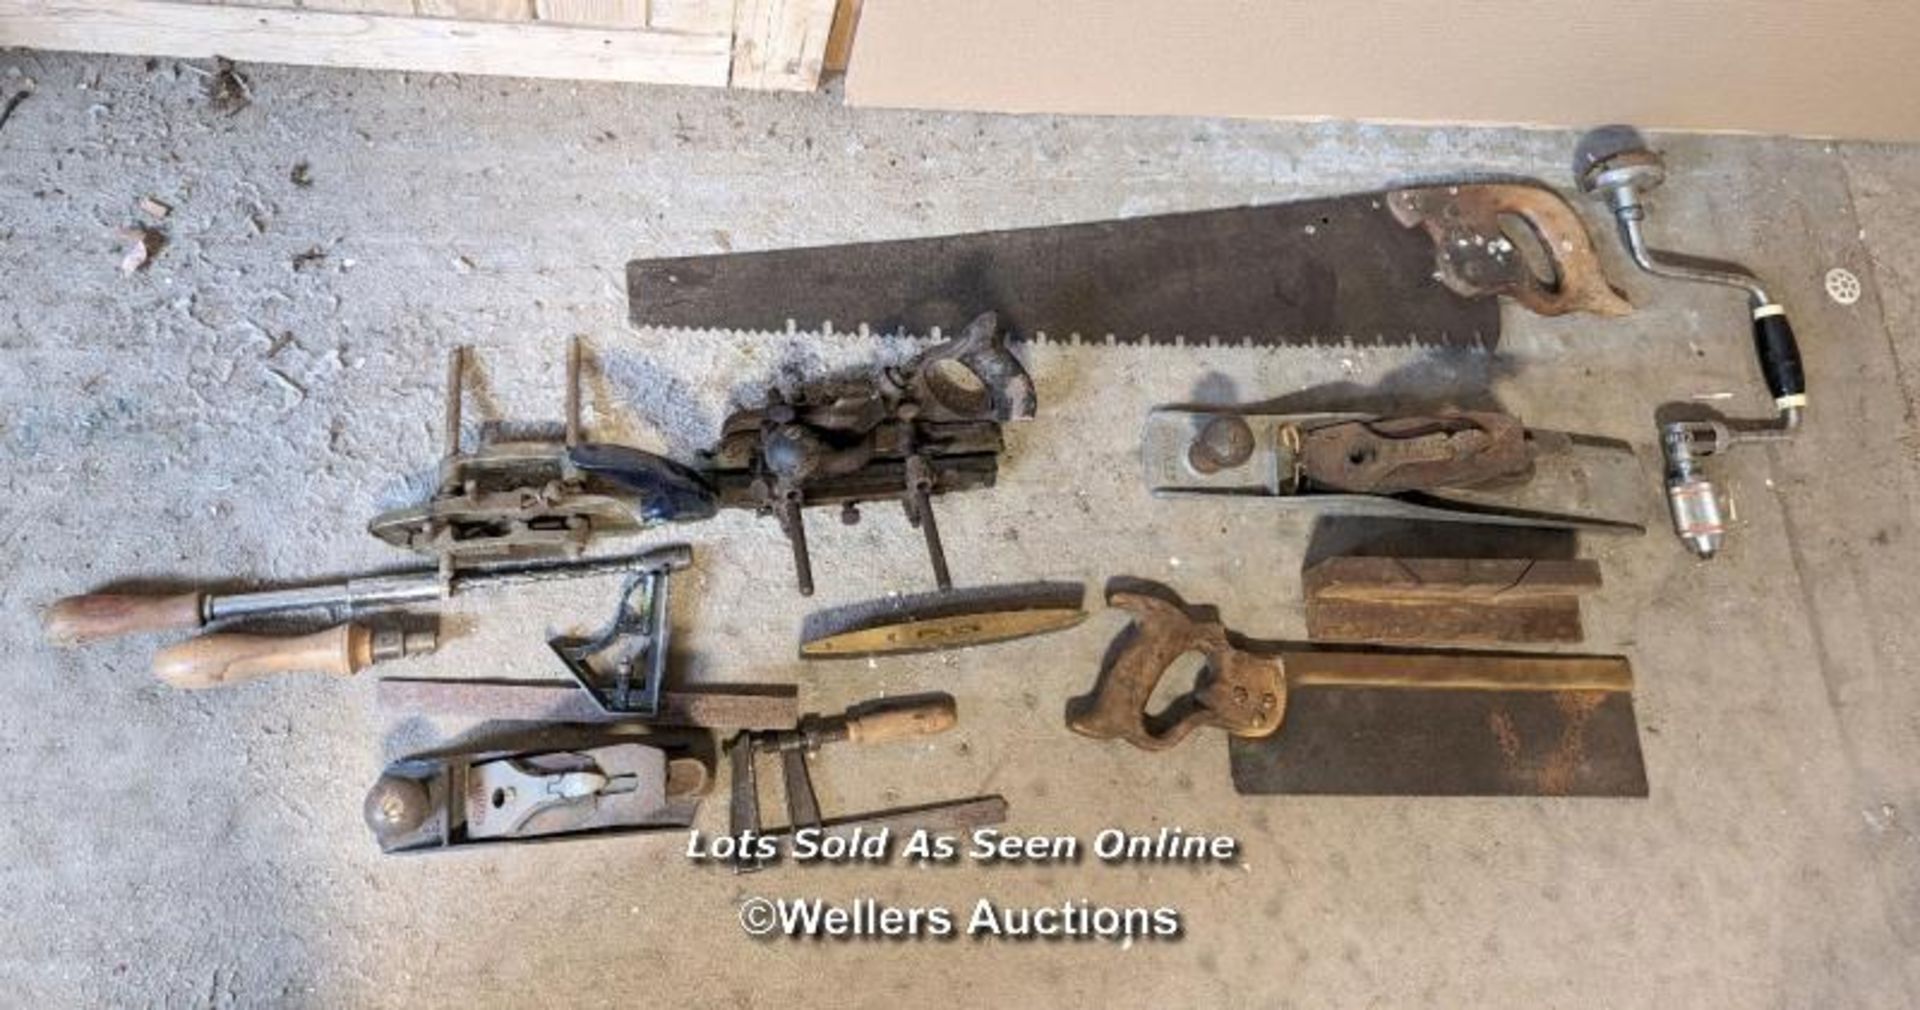 Batch of old wood working tools including planes, saws, bib and brace